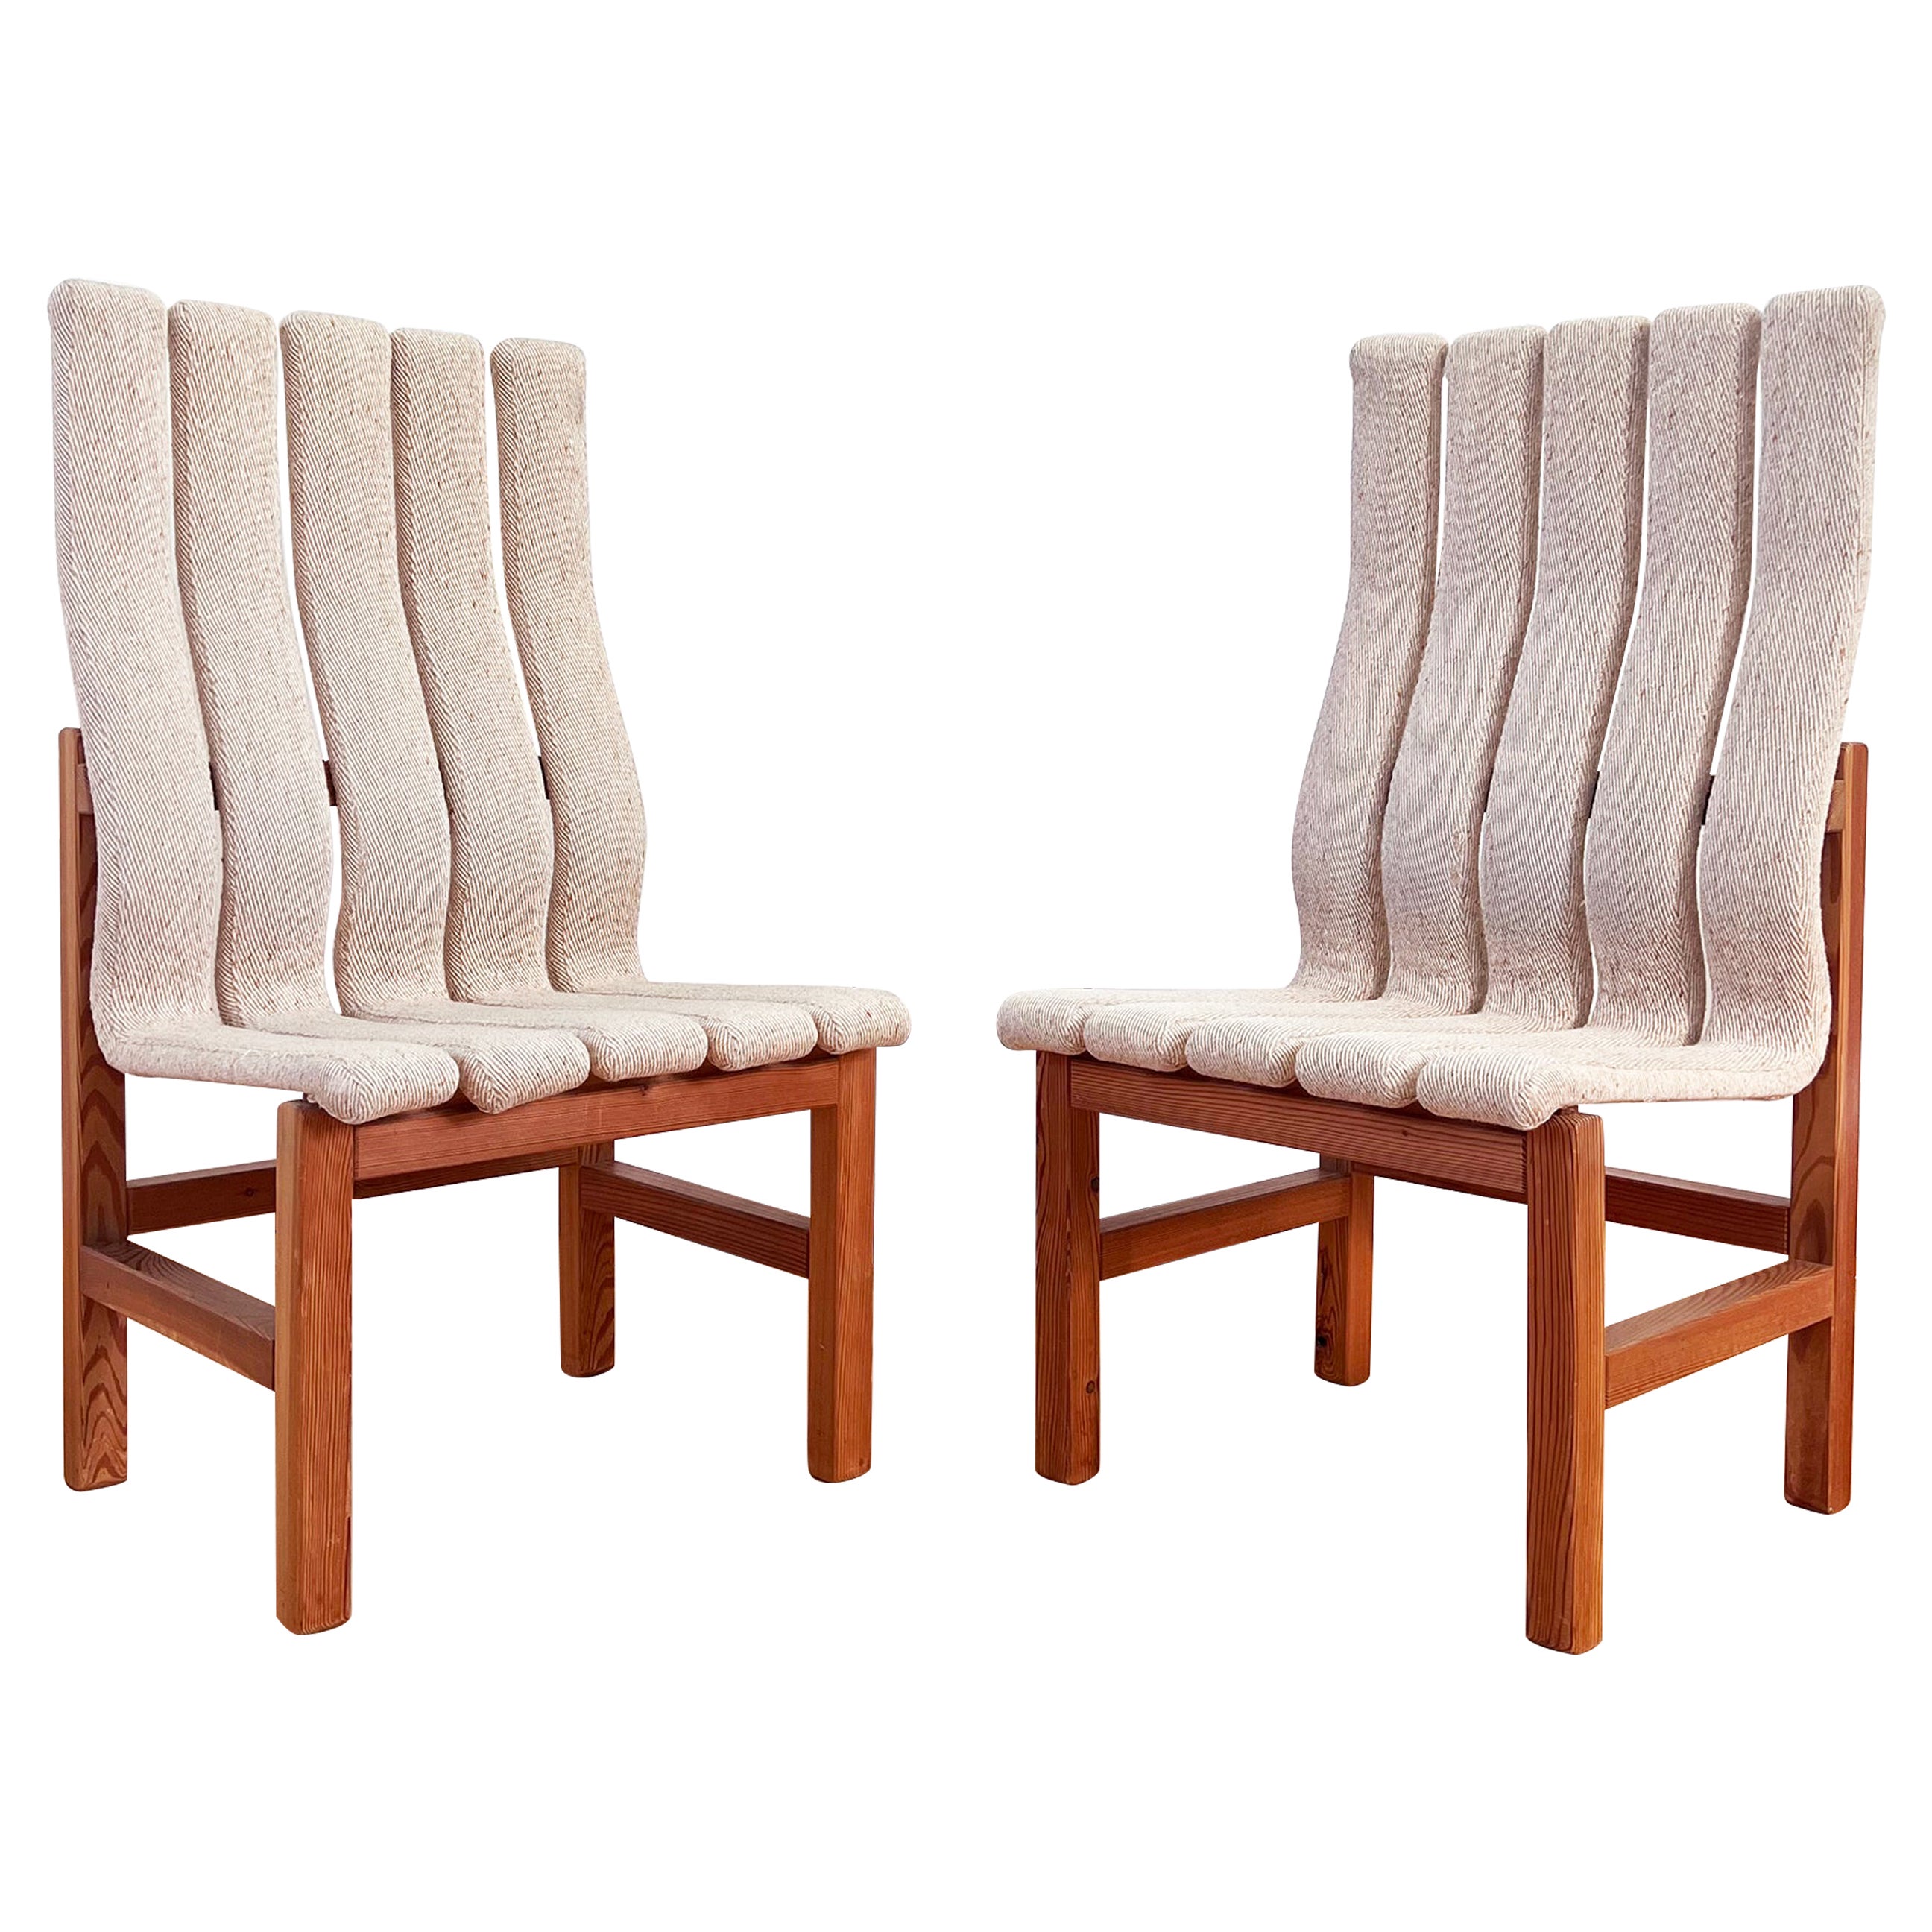 PAIR of Jan Ekselius Style Postmodern Scandinavian Accent / Lounge Chairs, 1970s For Sale